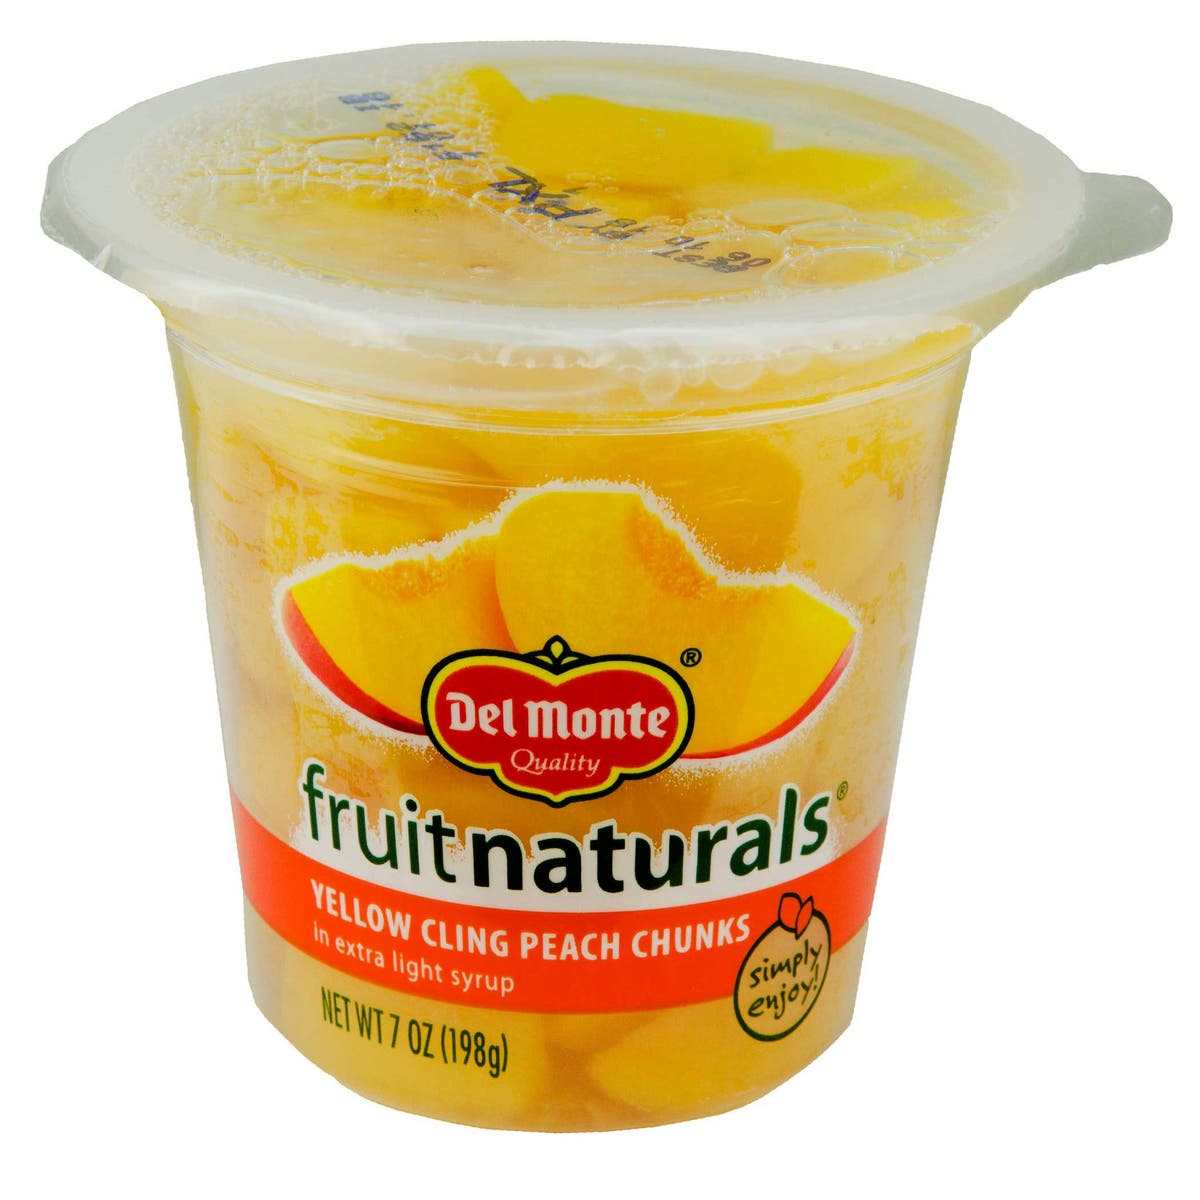 DEL MONTE FRUIT NATURALS W/ YELLOW CLING PEACHES IN LIGHT SYRUP 7 OZ